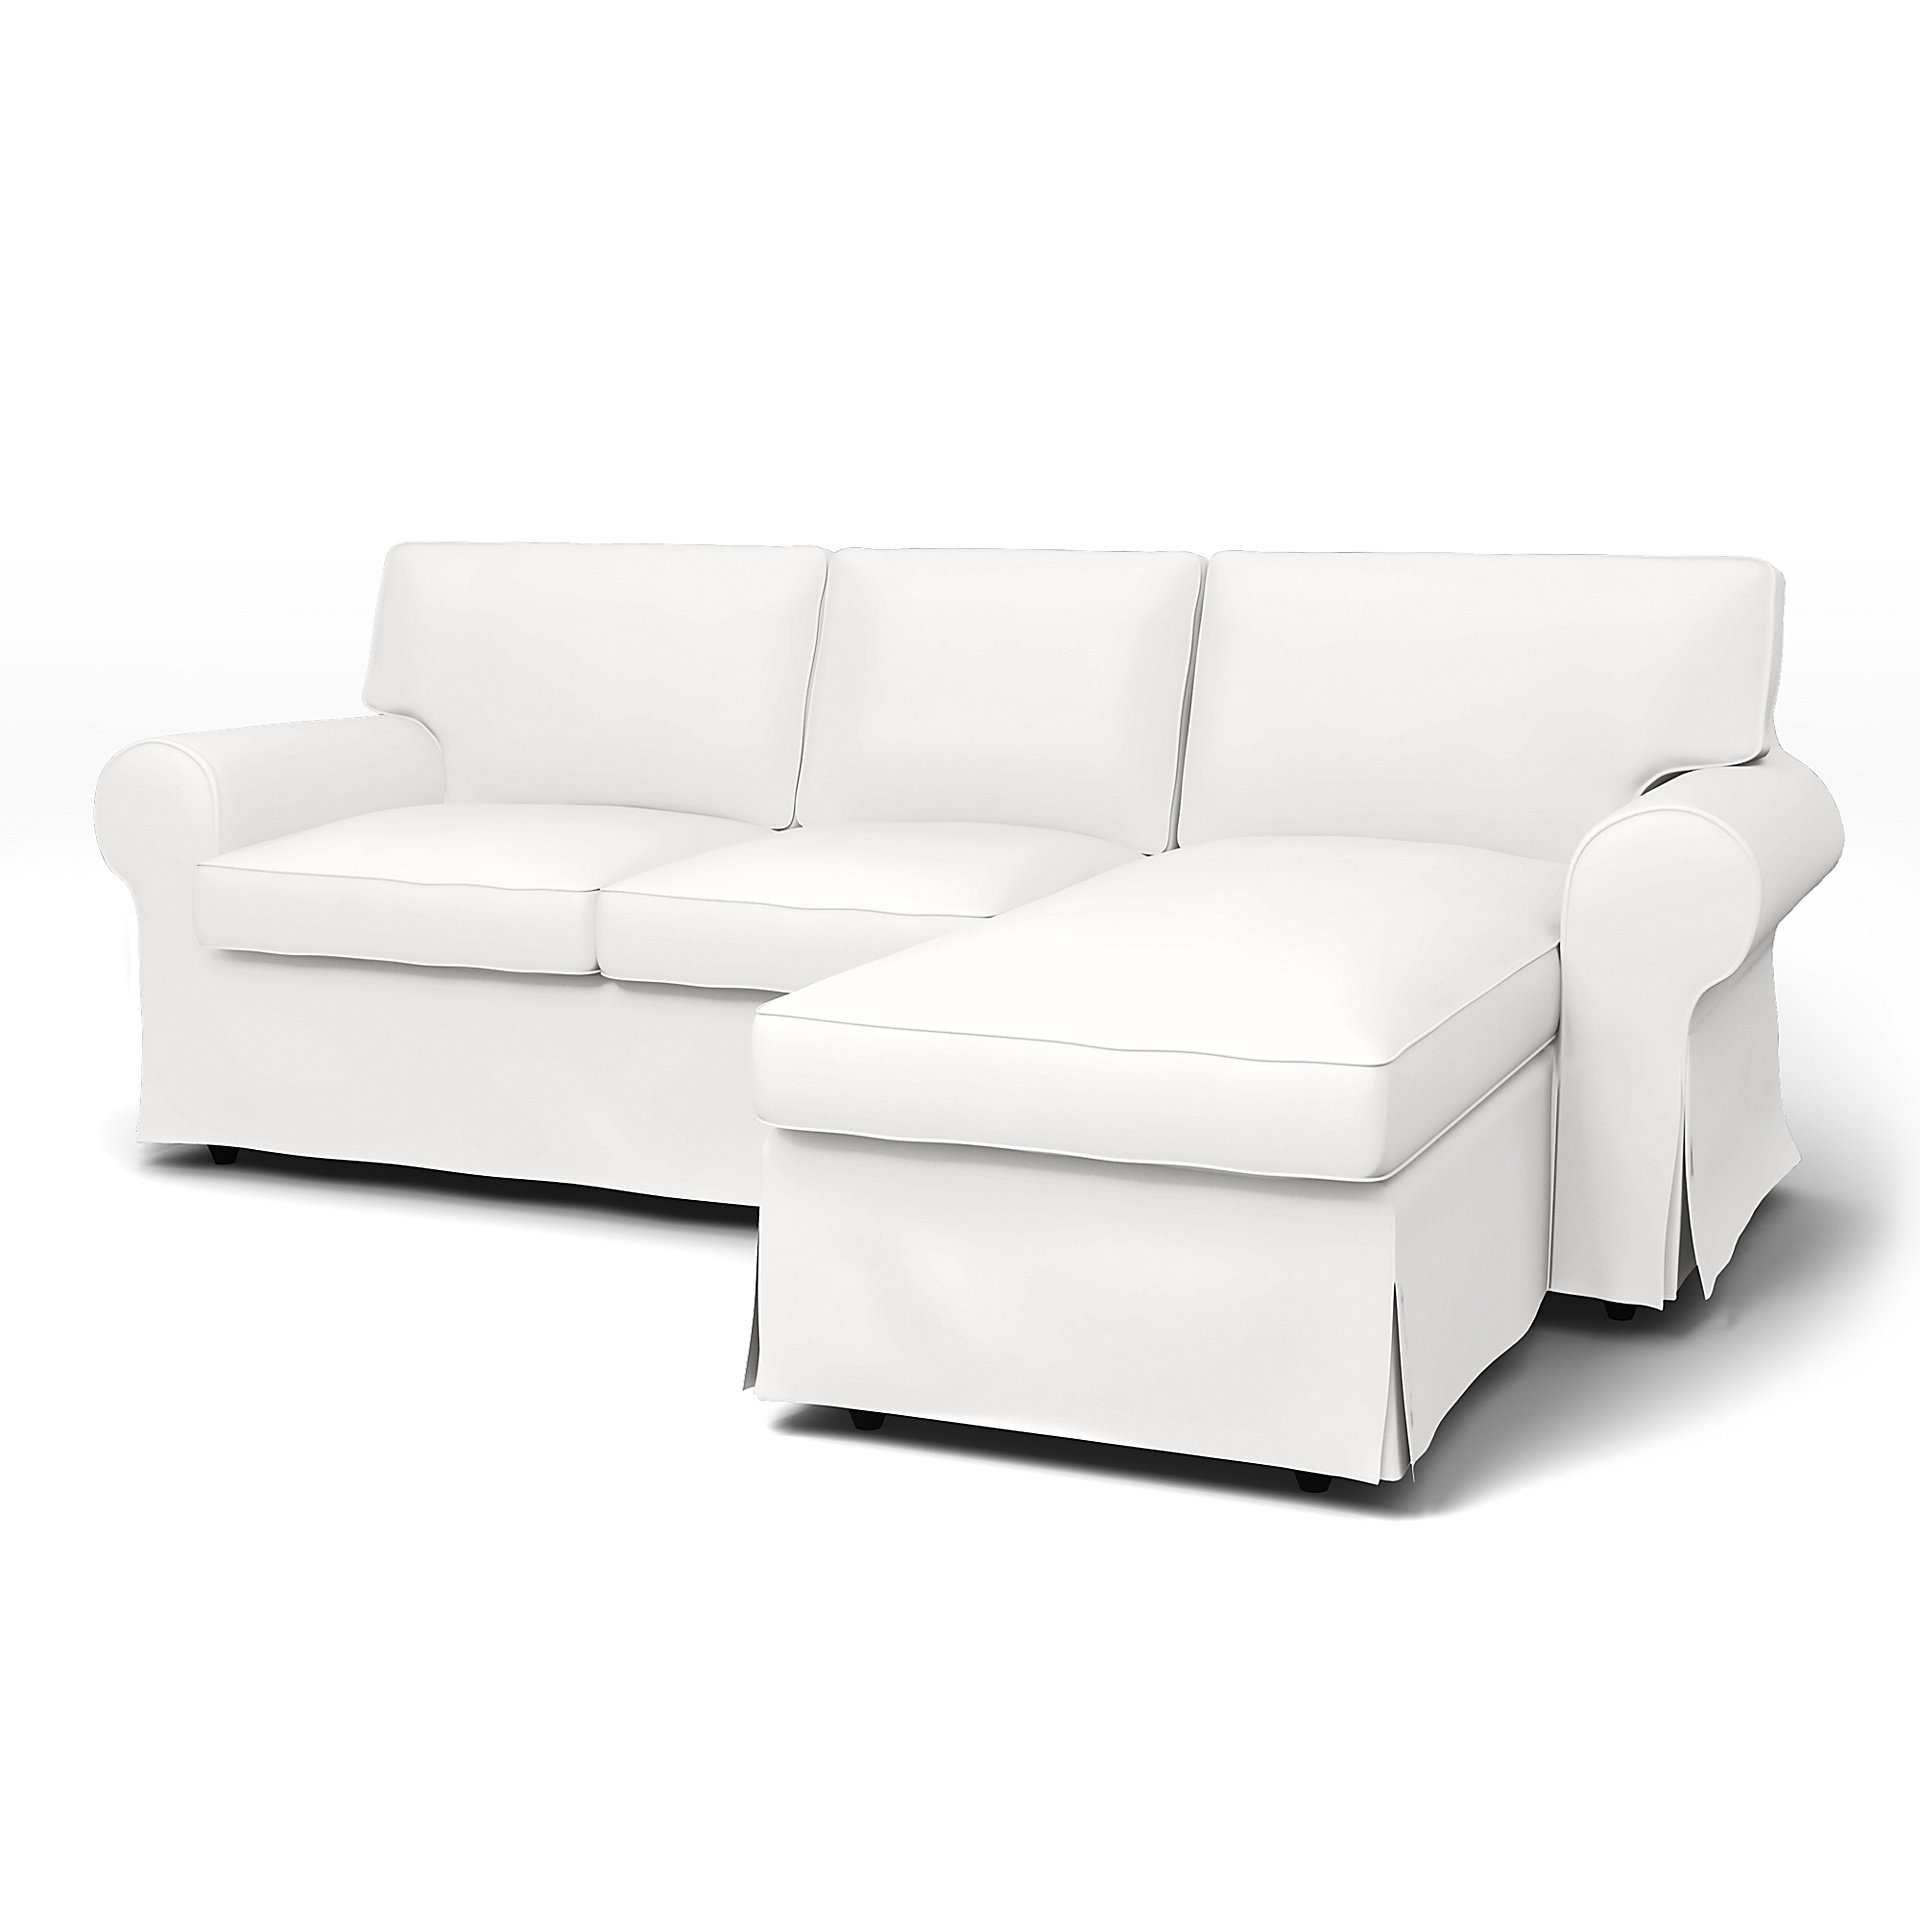 IKEA - Ektorp 3 Seater Sofa with Chaise Cover, Absolute White, Cotton - Bemz